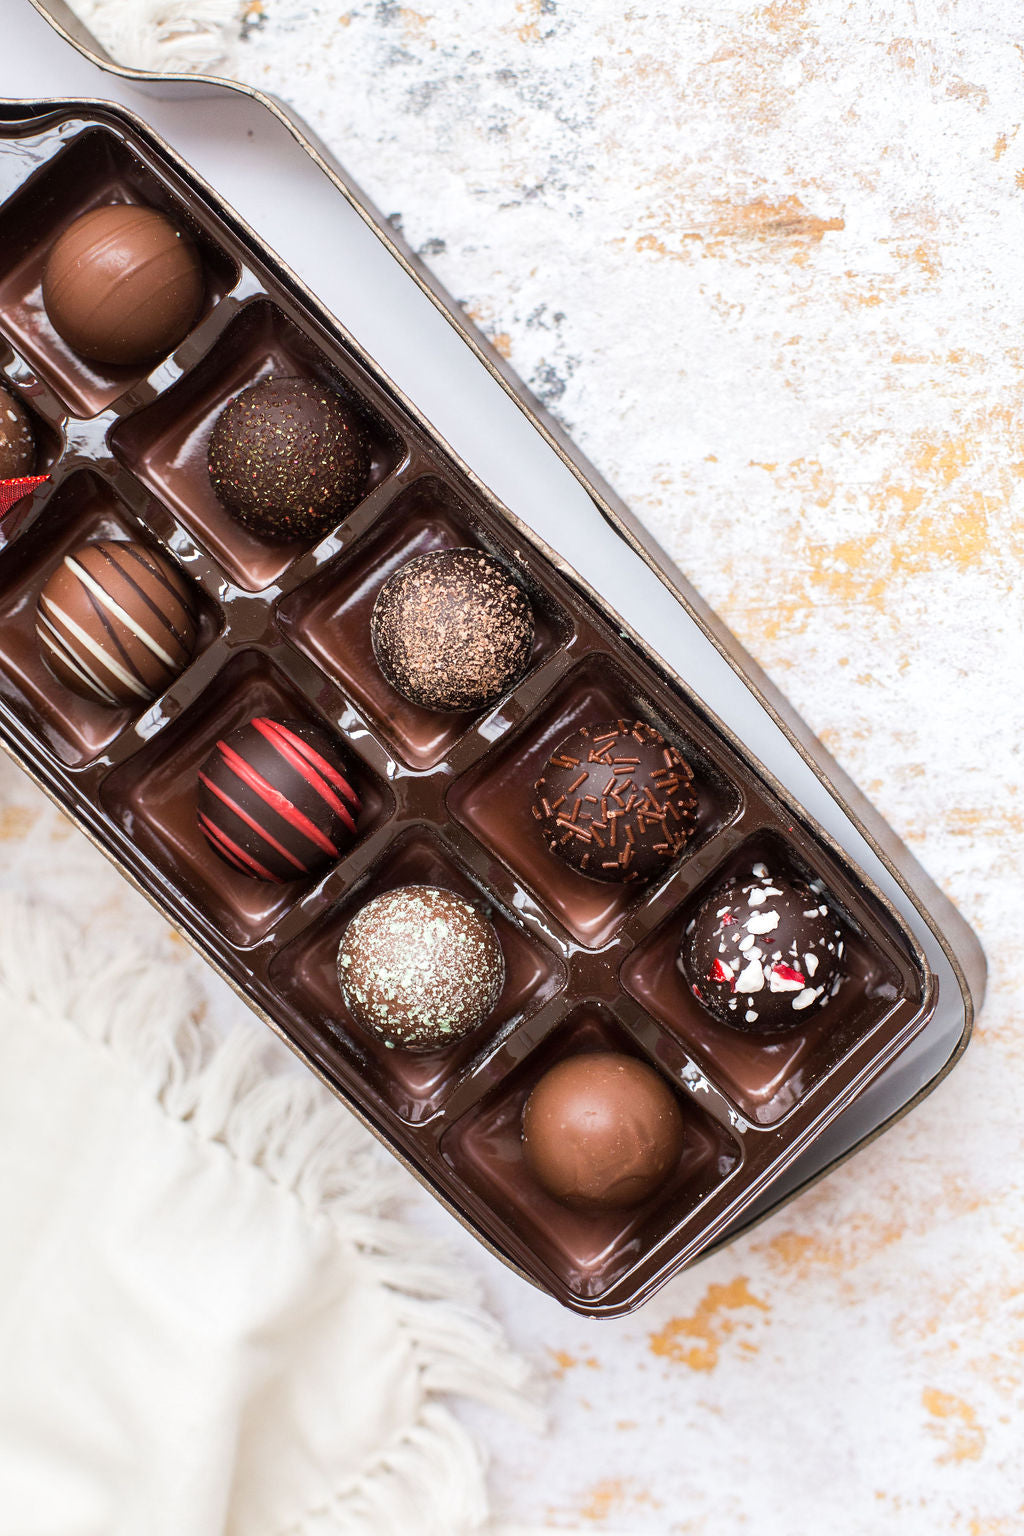 12-piece assortment of Sugar Plum’s incredible handcrafted chocolate truffles all beautifully laid out in a wine bottle-shaped box. 